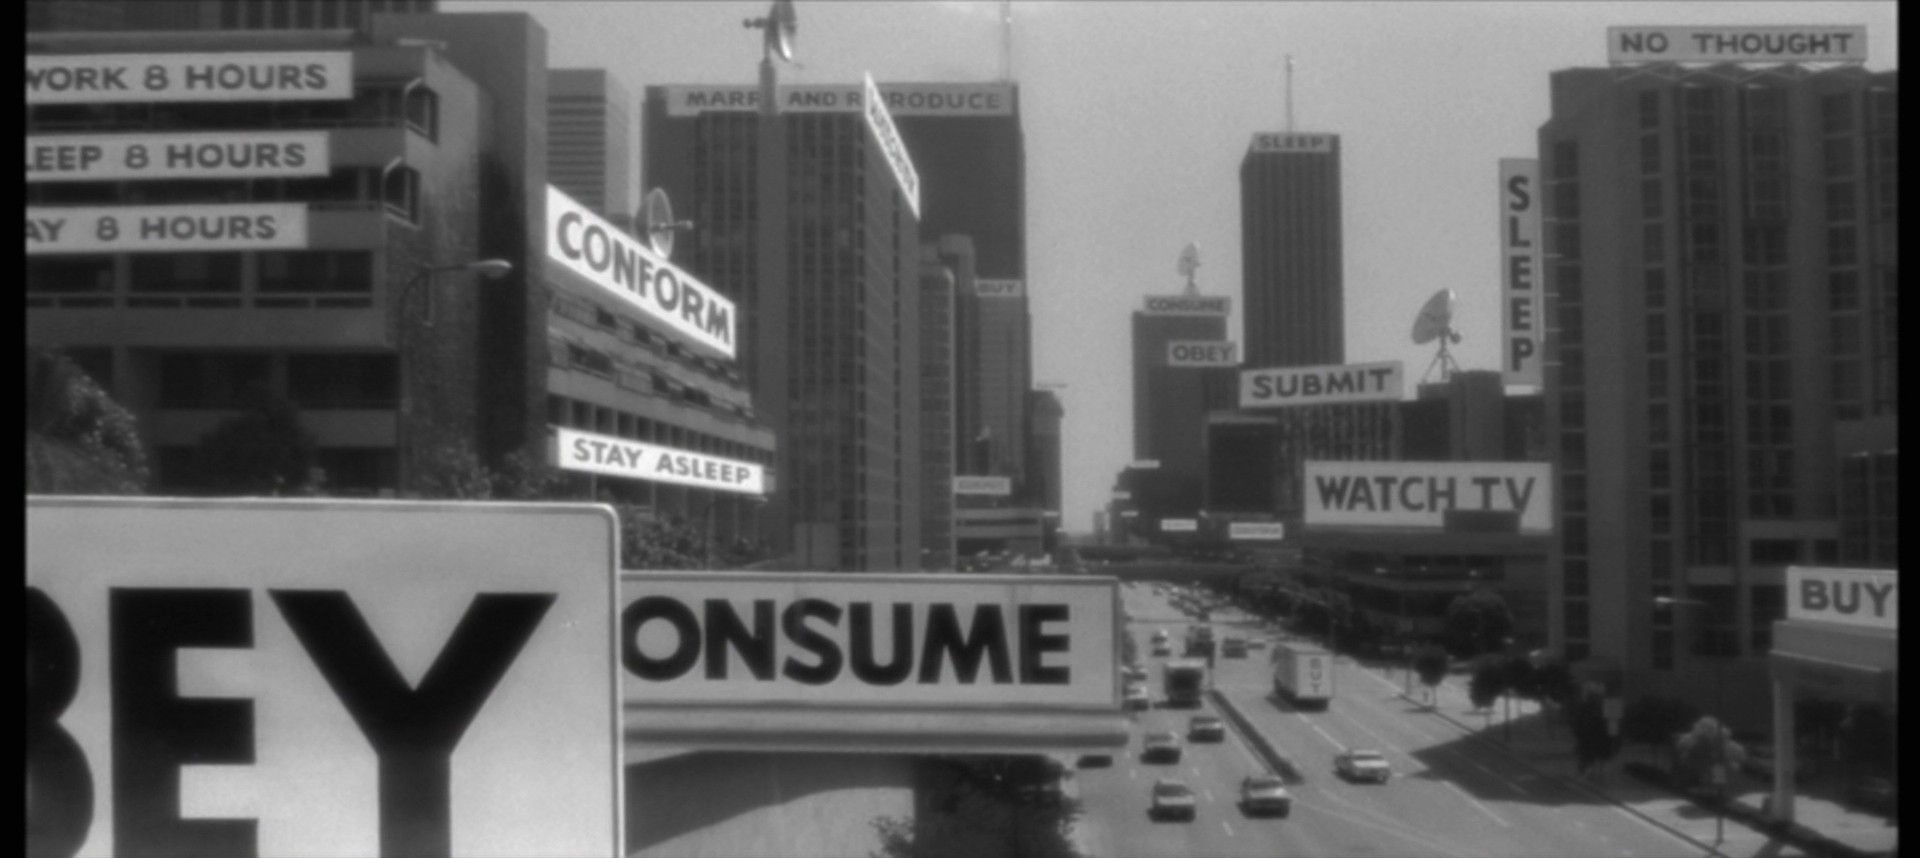 An image from the film They Live